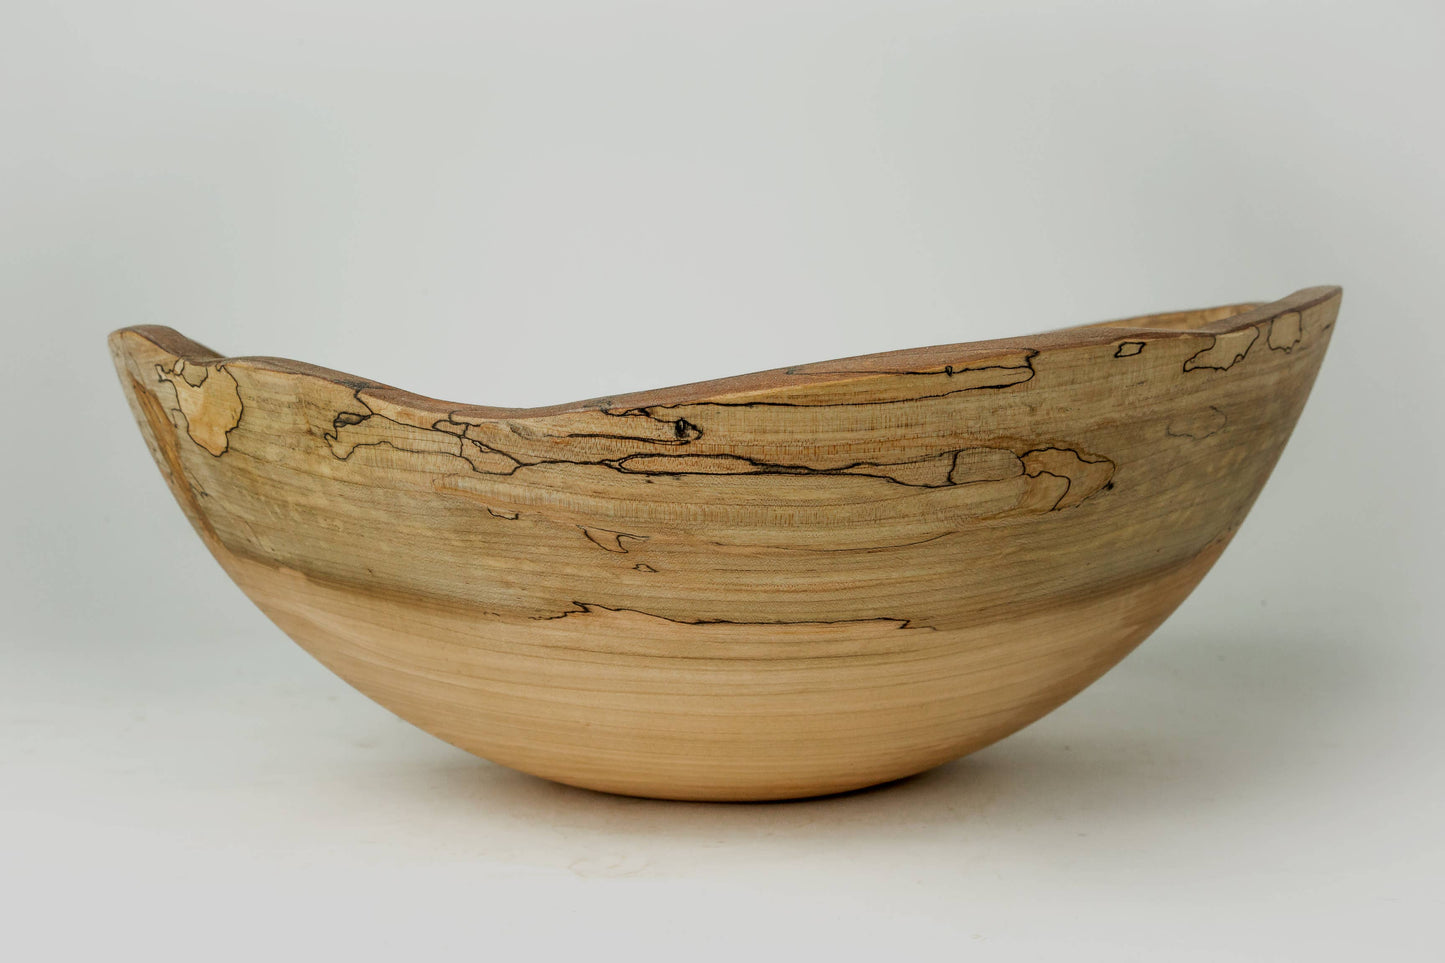 10" SPALTED MAPLE OVAL BOWL